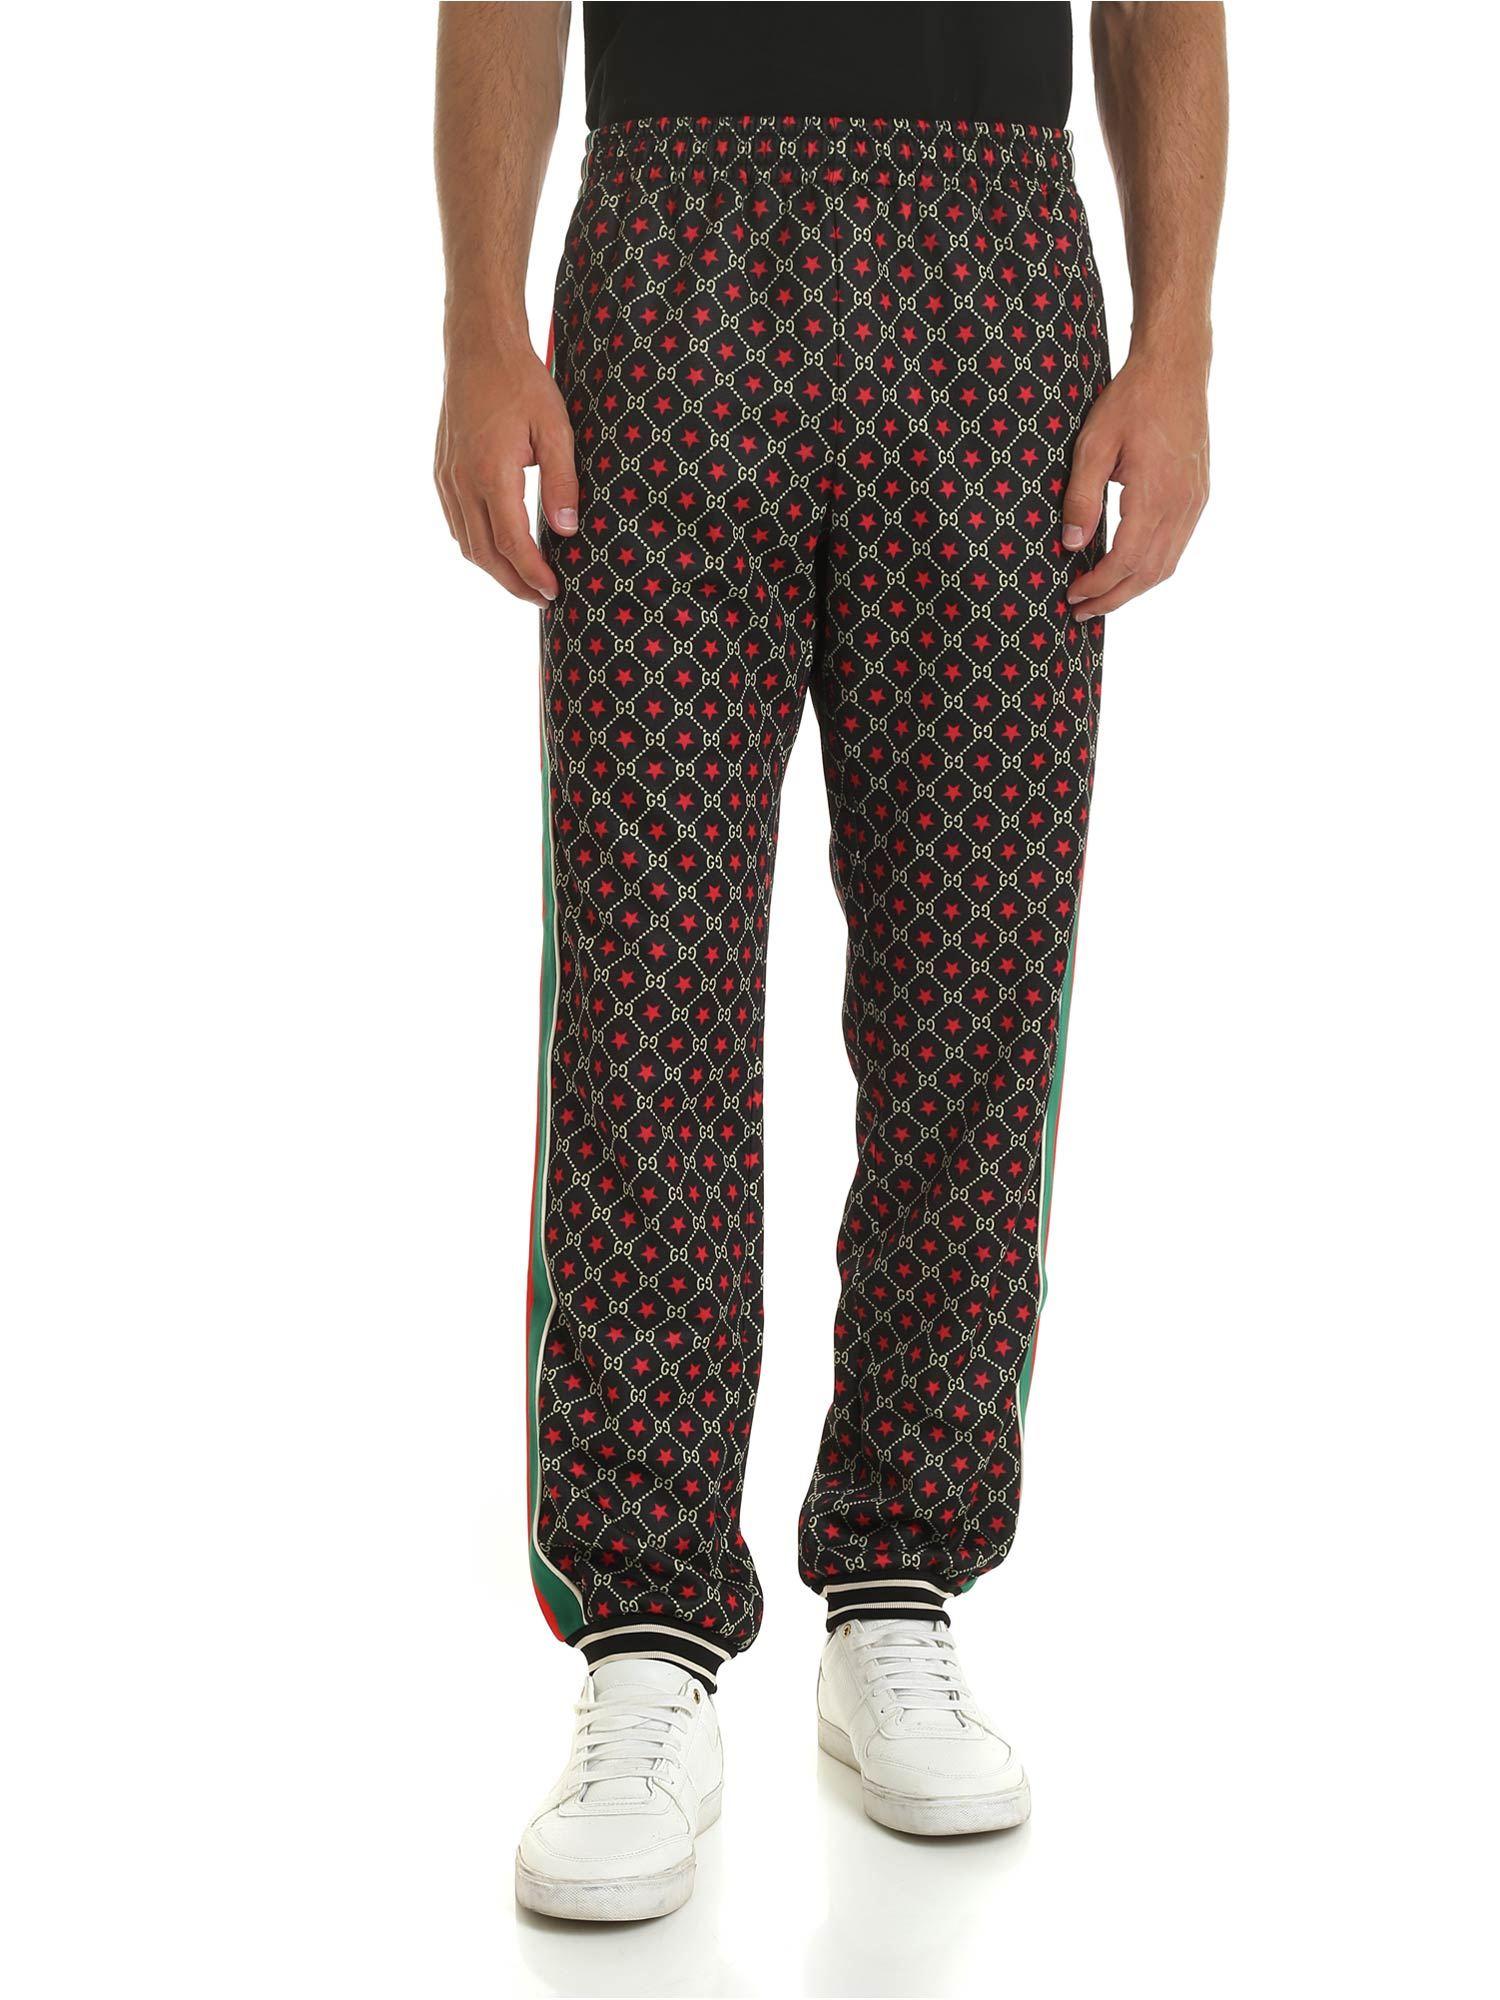 Gucci Synthetic Gg Logo Cotton Blend Track Pants in Black for Men - Lyst